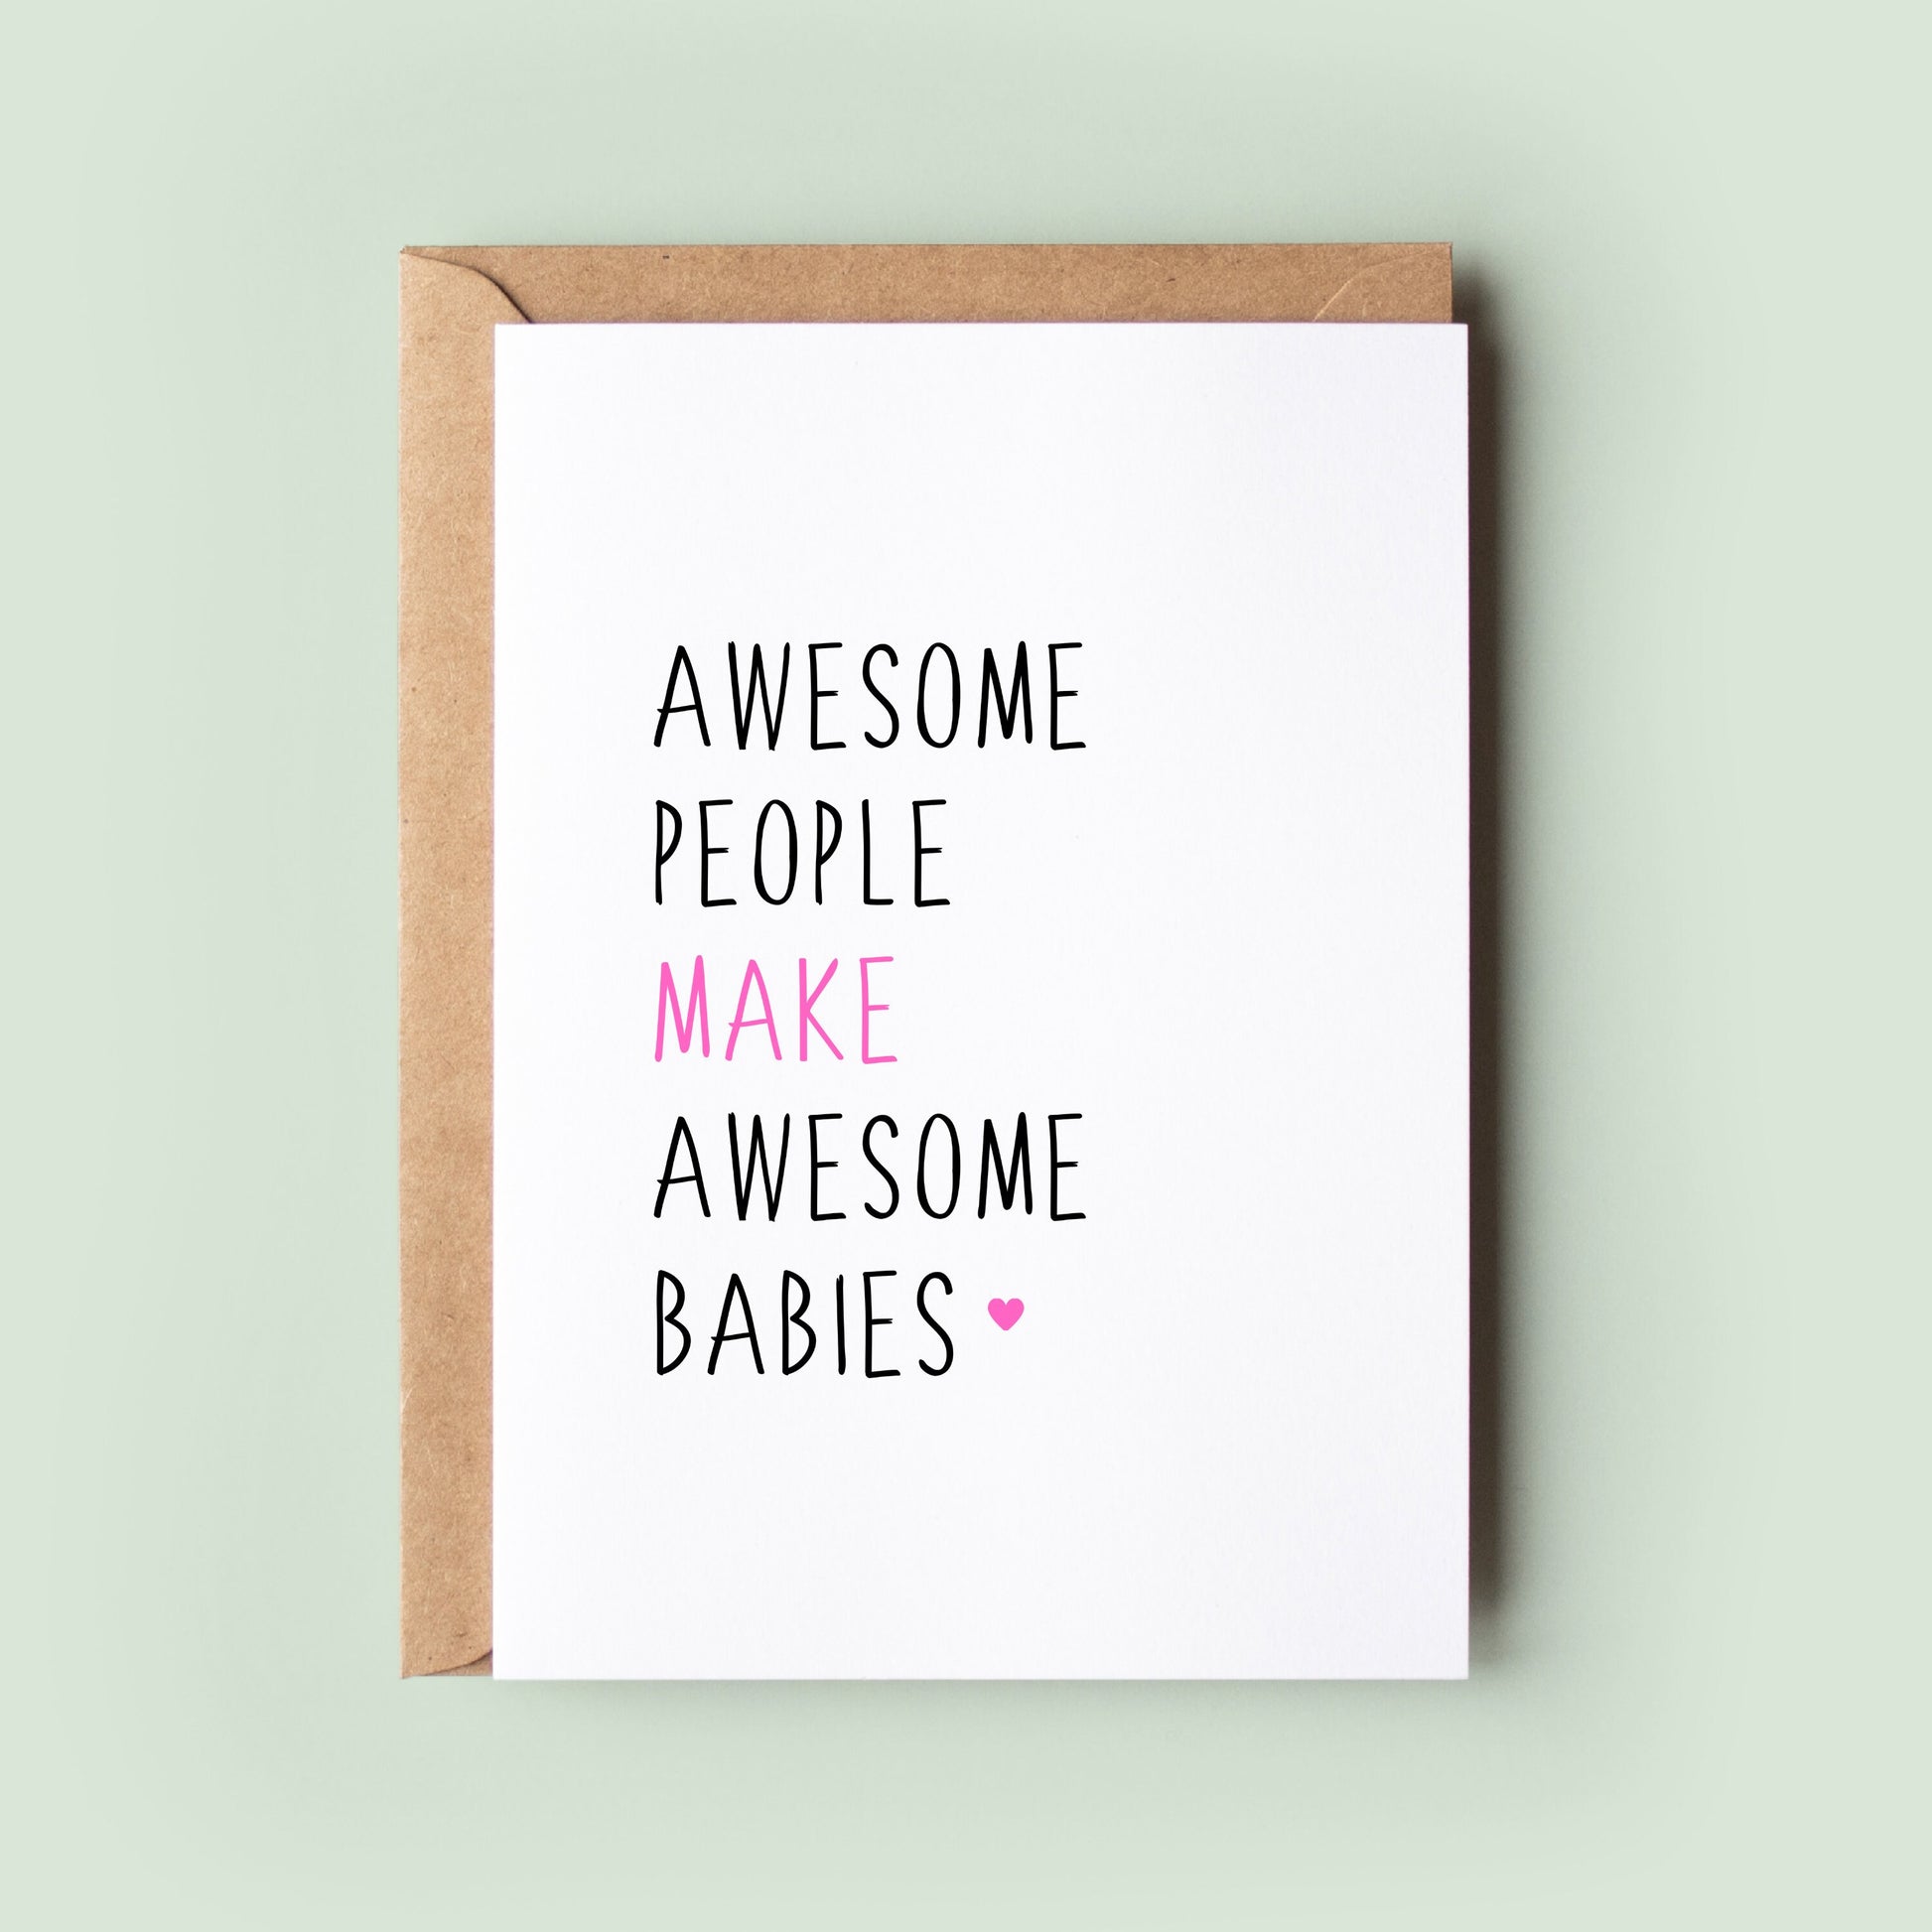 Awesome People Make Awesome Babies Greetings Card, Congratulations New Baby Card, New Parents Card, New Born Baby Card, New Dad, New Mum